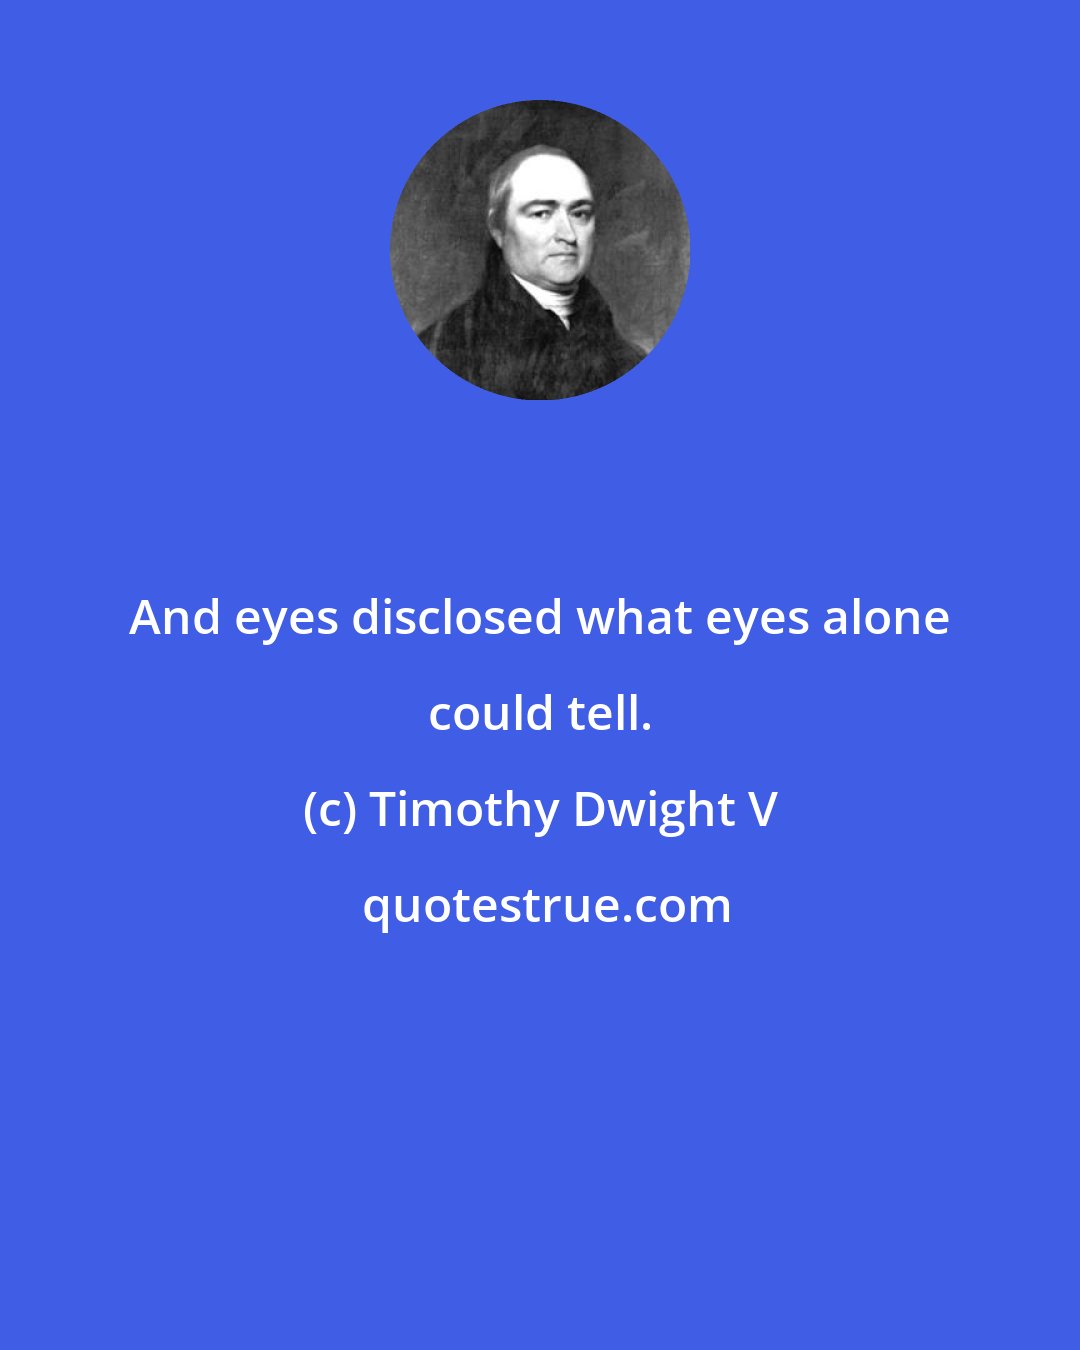 Timothy Dwight V: And eyes disclosed what eyes alone could tell.